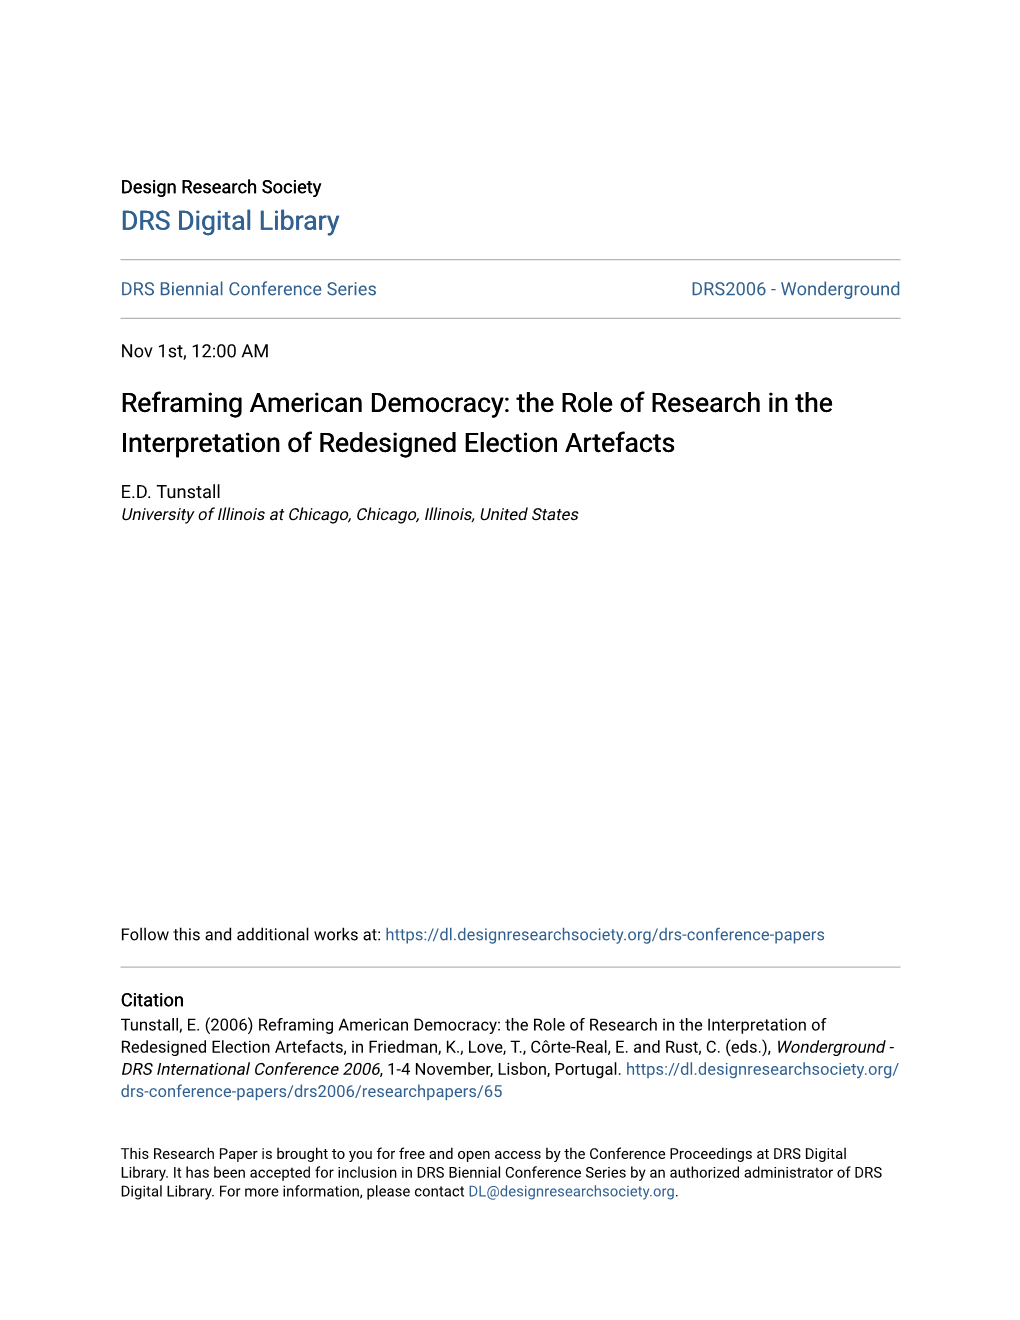 The Role of Research in the Interpretation of Redesigned Election Artefacts